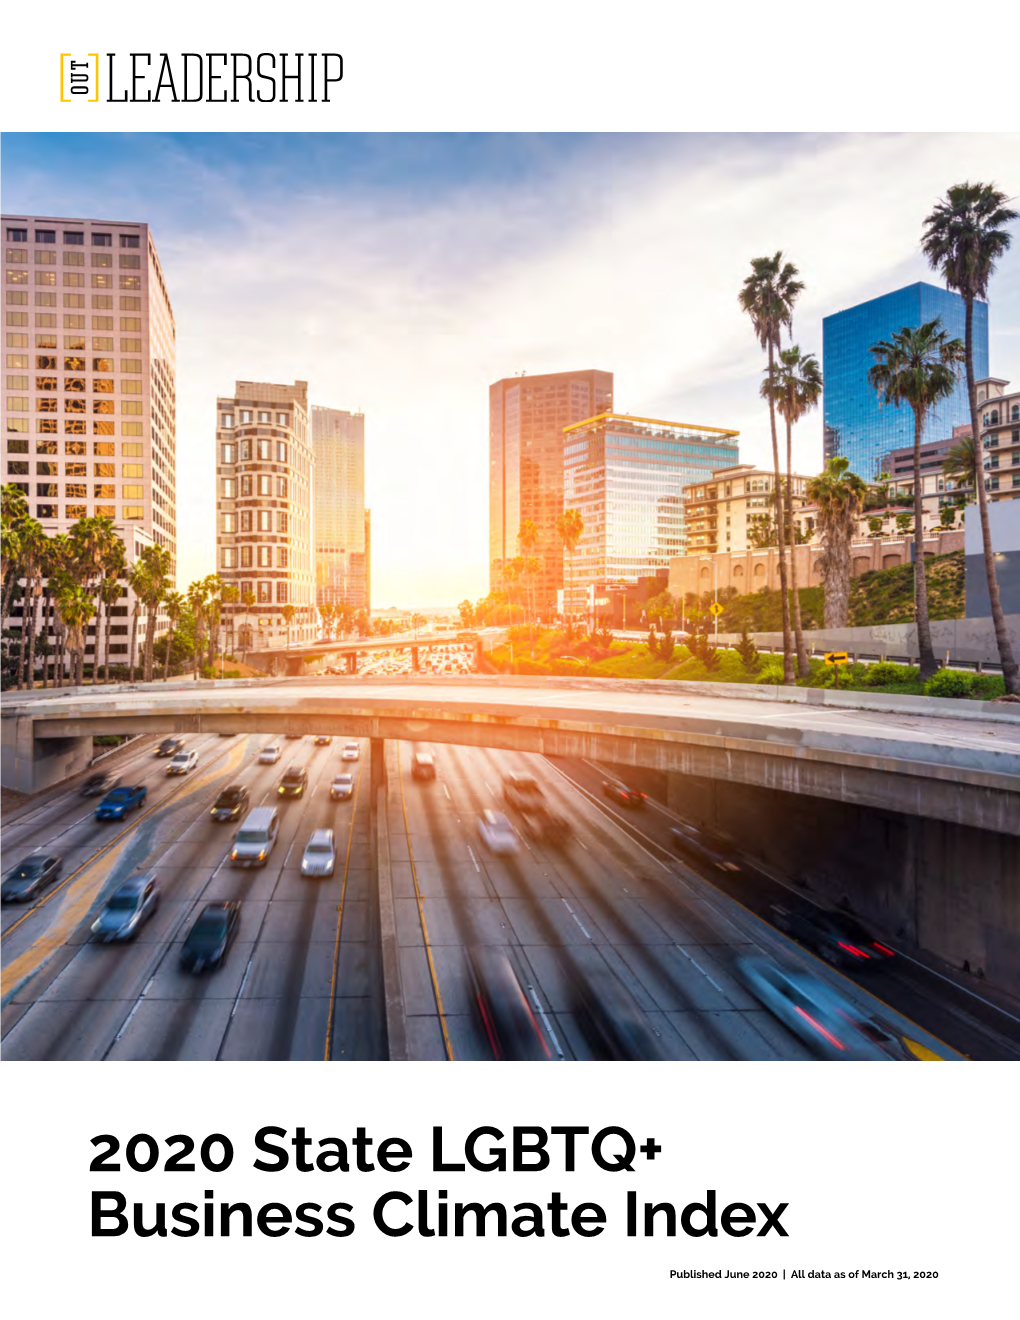 2020 State LGBTQ+ Business Climate Index